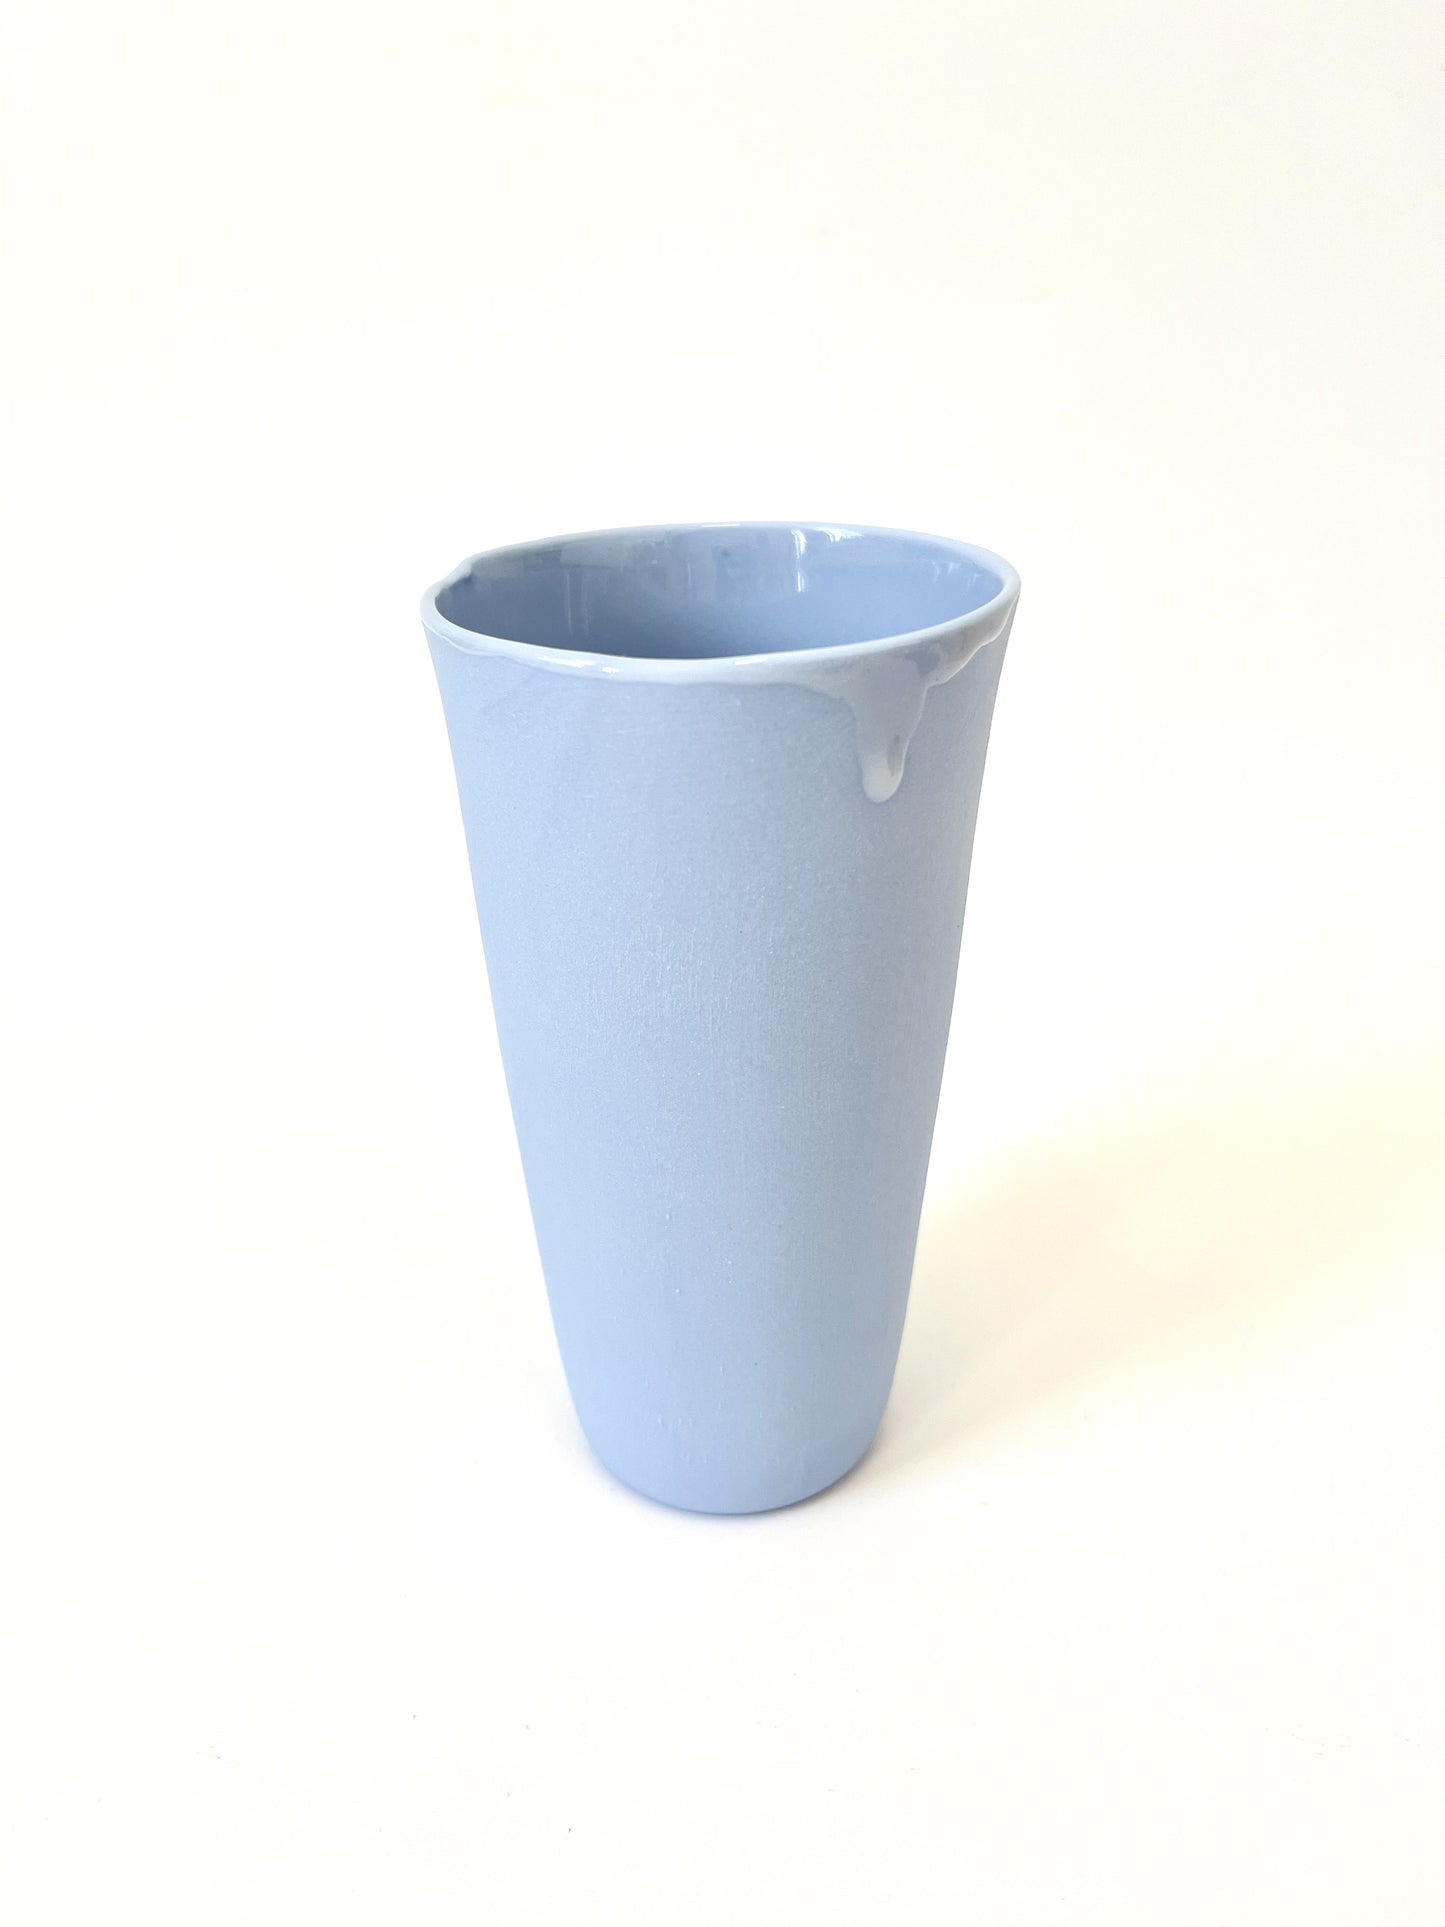 Periwinkle Blue Vessel - One of a Kind Ceramic - Tall 8 x 15cm